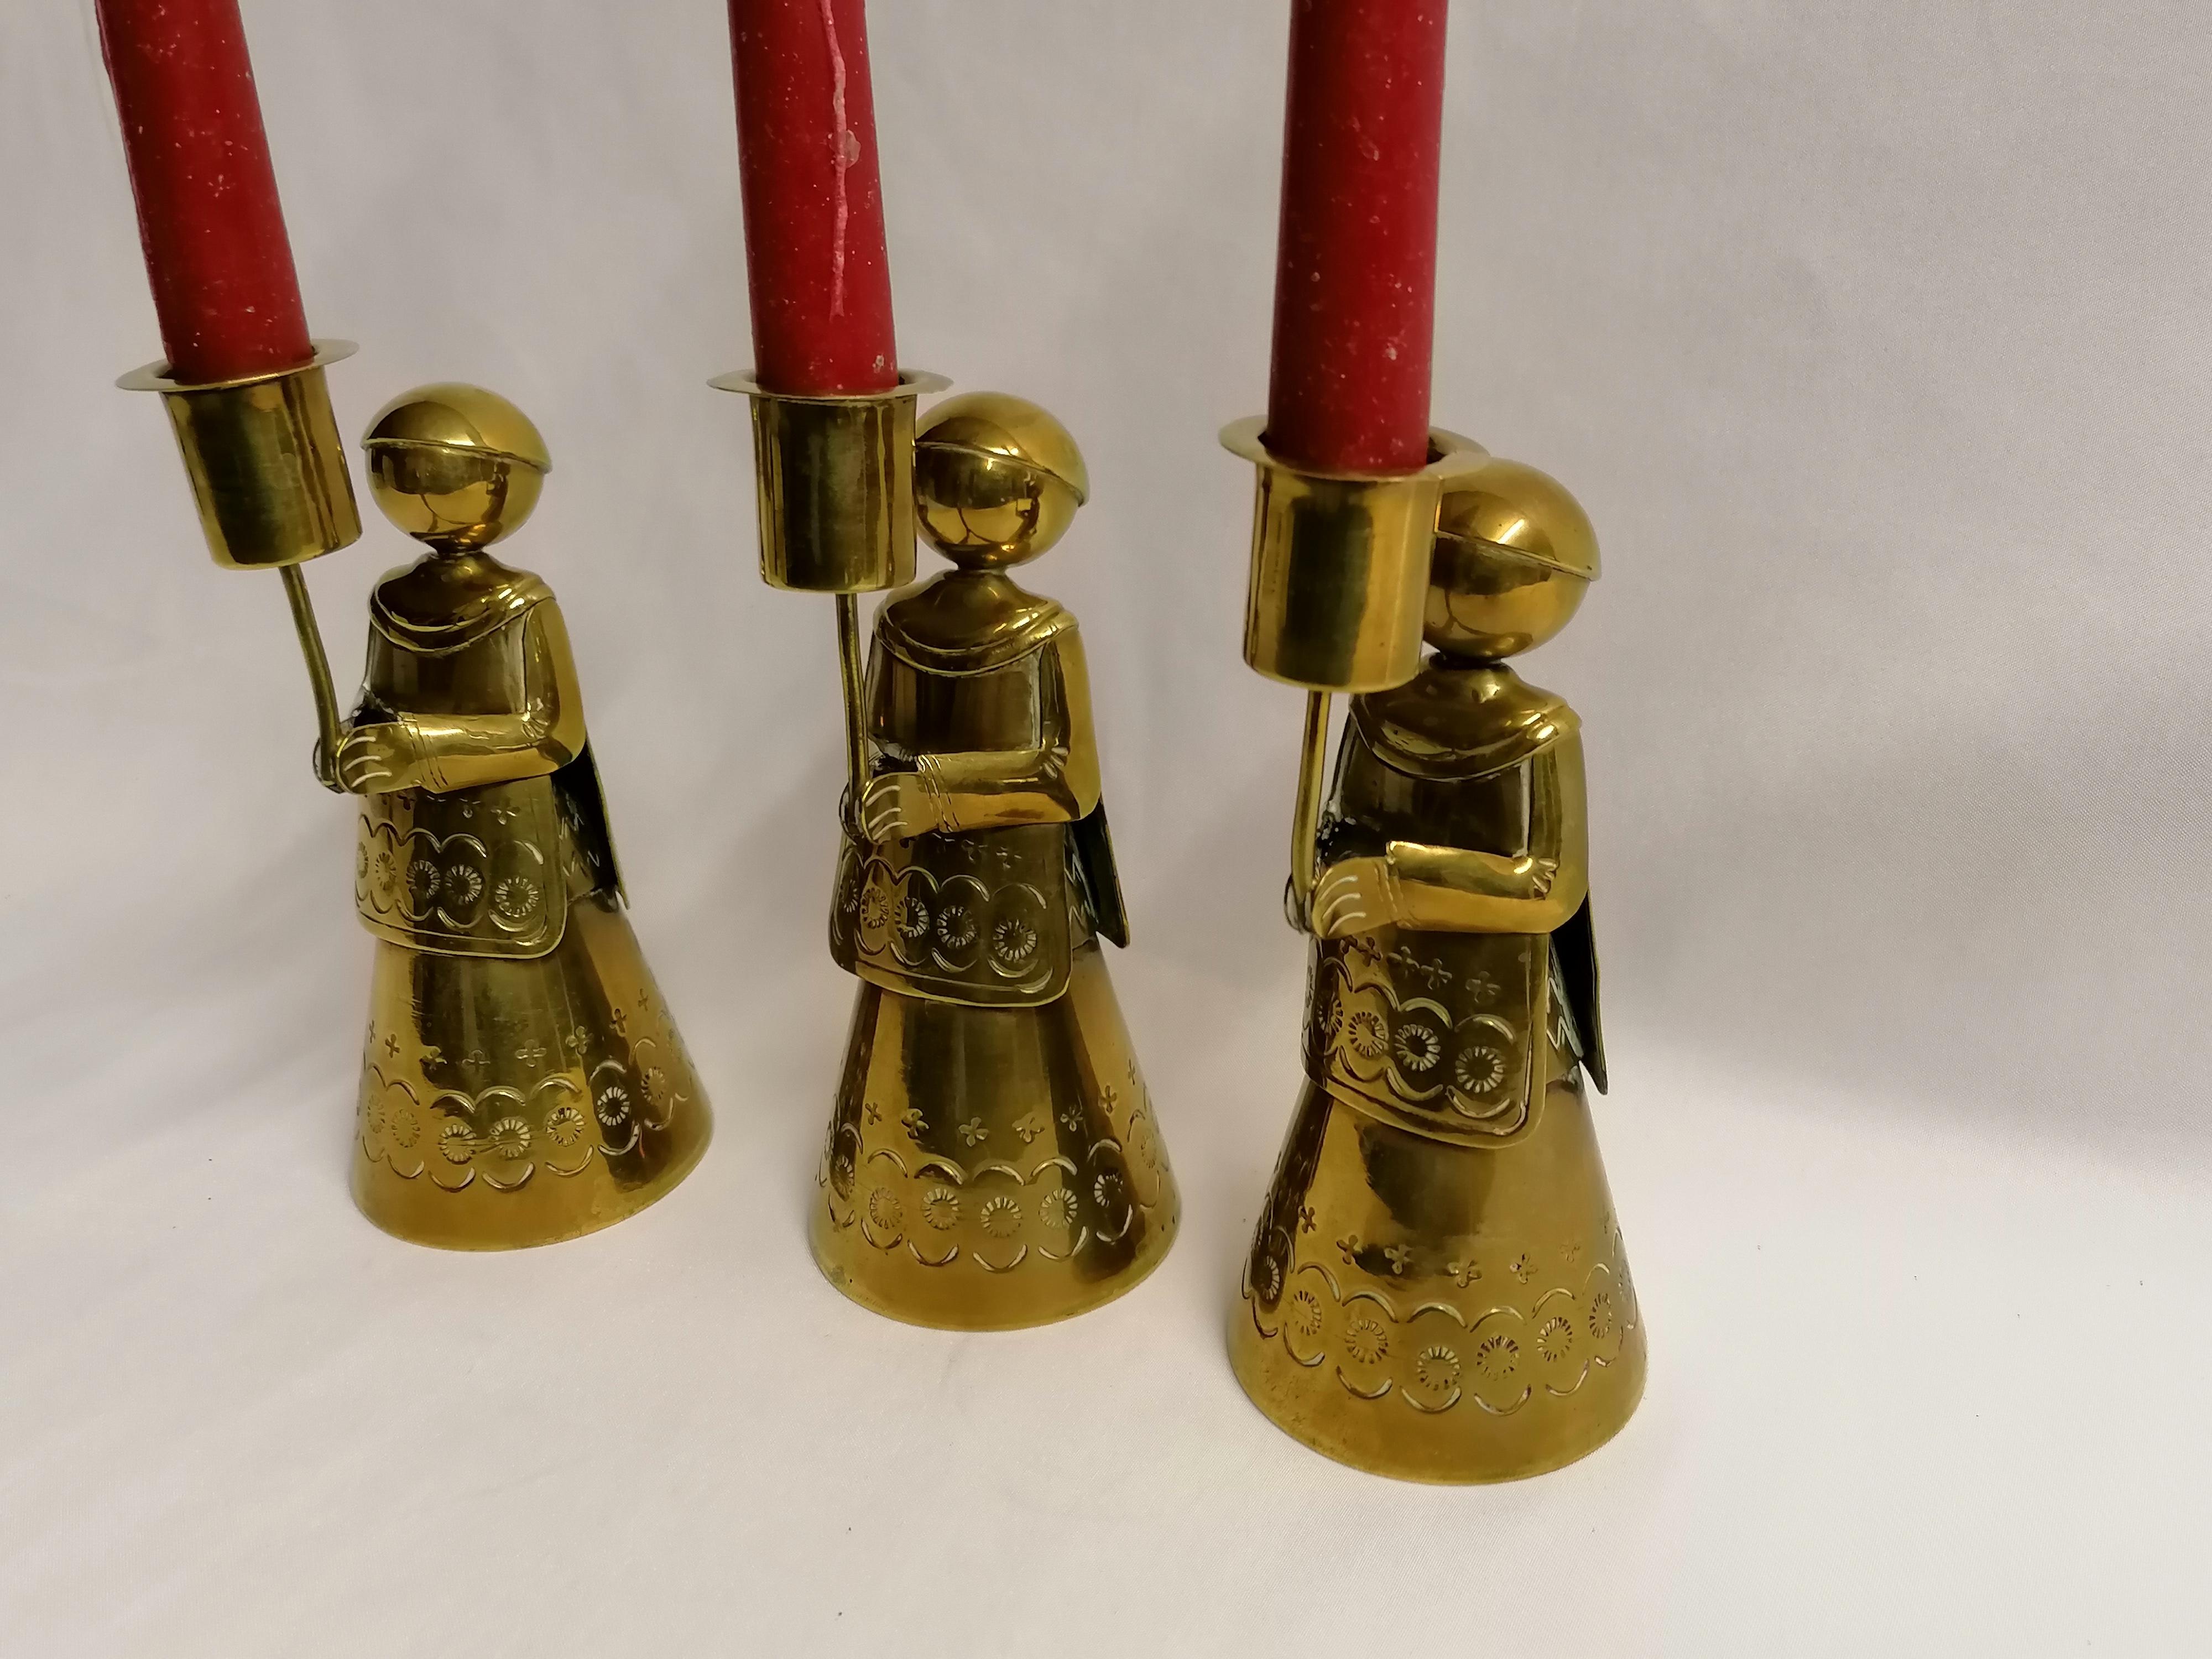 Vintage Mexican modernist brass candle holder, for 3 candles, featuring a figure like a pilgrim's costume Brass Angels Alter Hand Hammered P Mexico 4 in good condition, the items are stamped on the bottom 
See all pictures please as it makes part